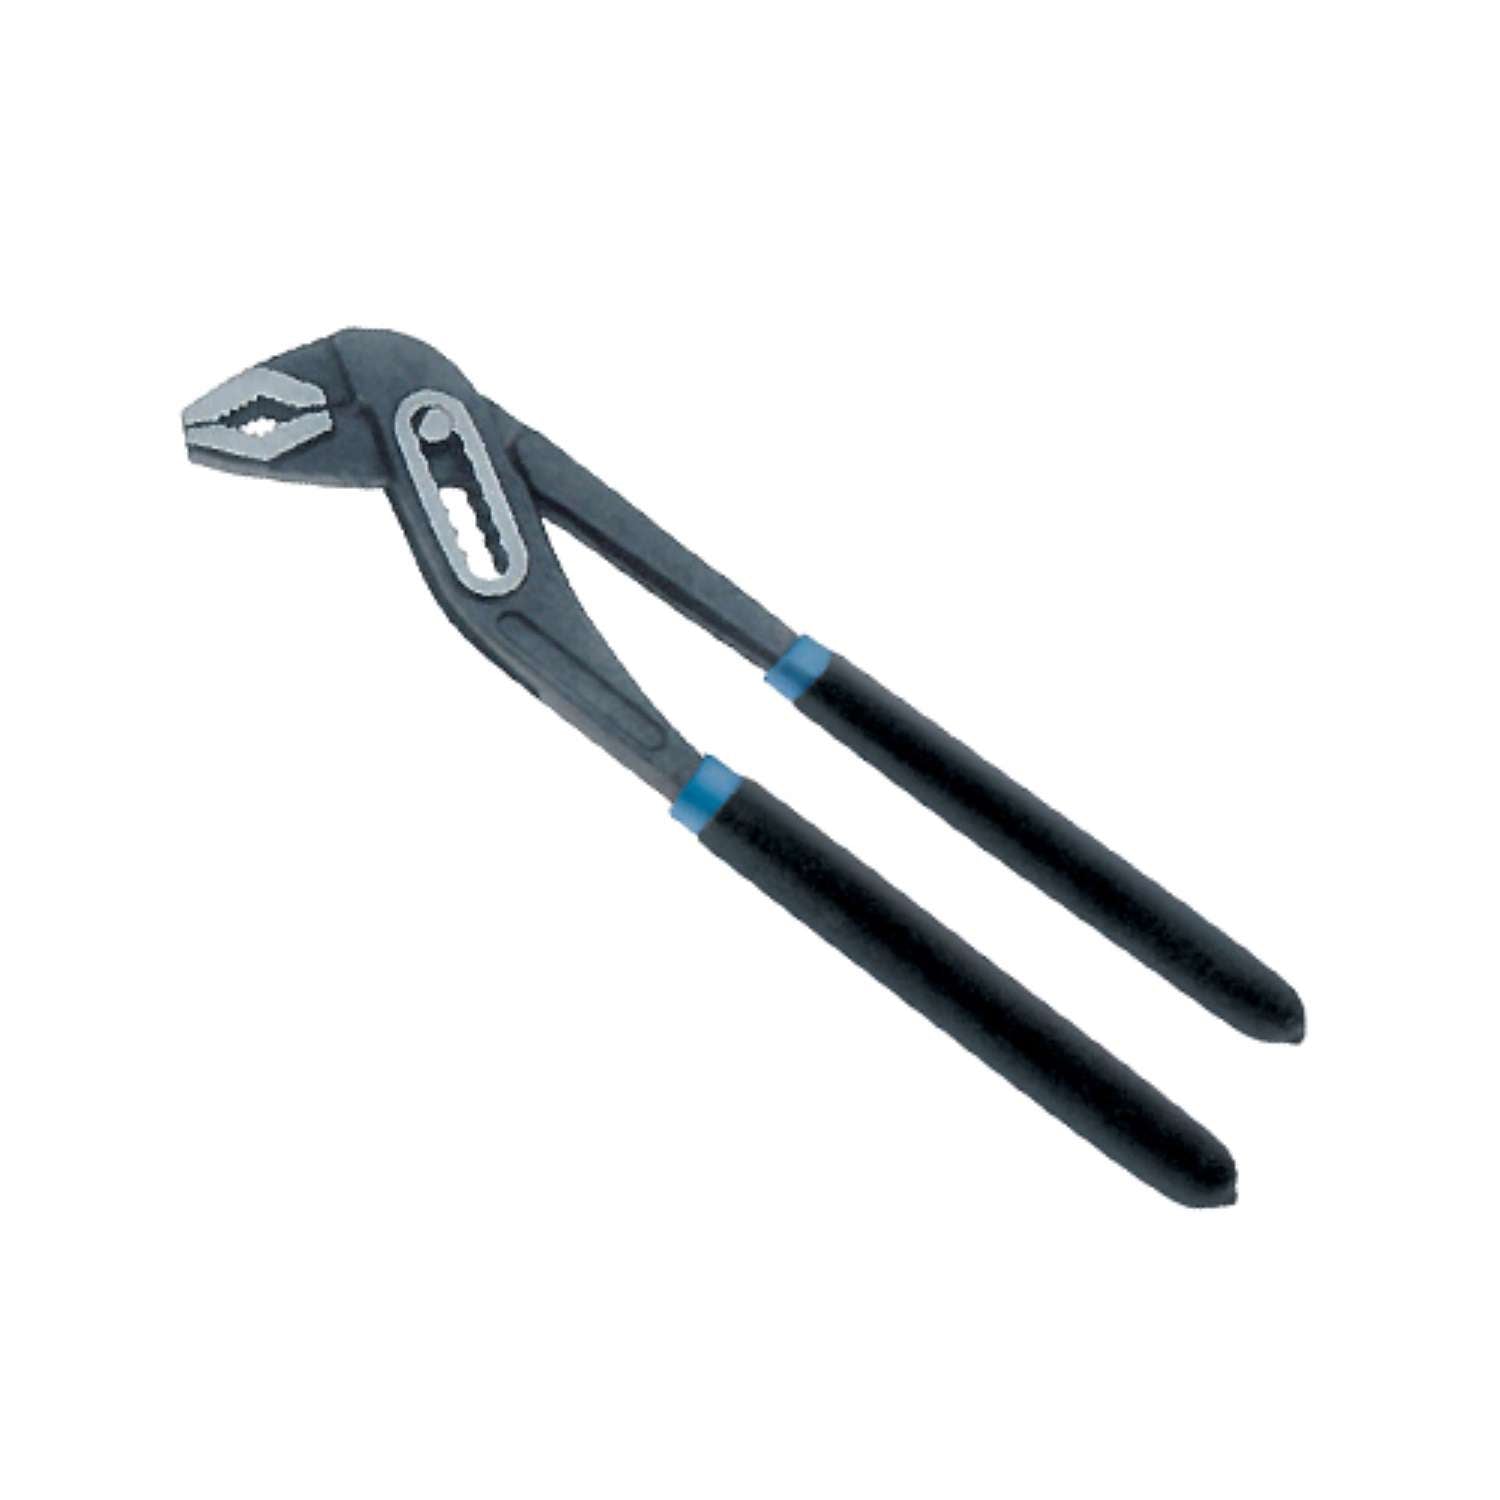 Adjustable wrench for pipes and nuts chrome vanadium - UM 30 PR25